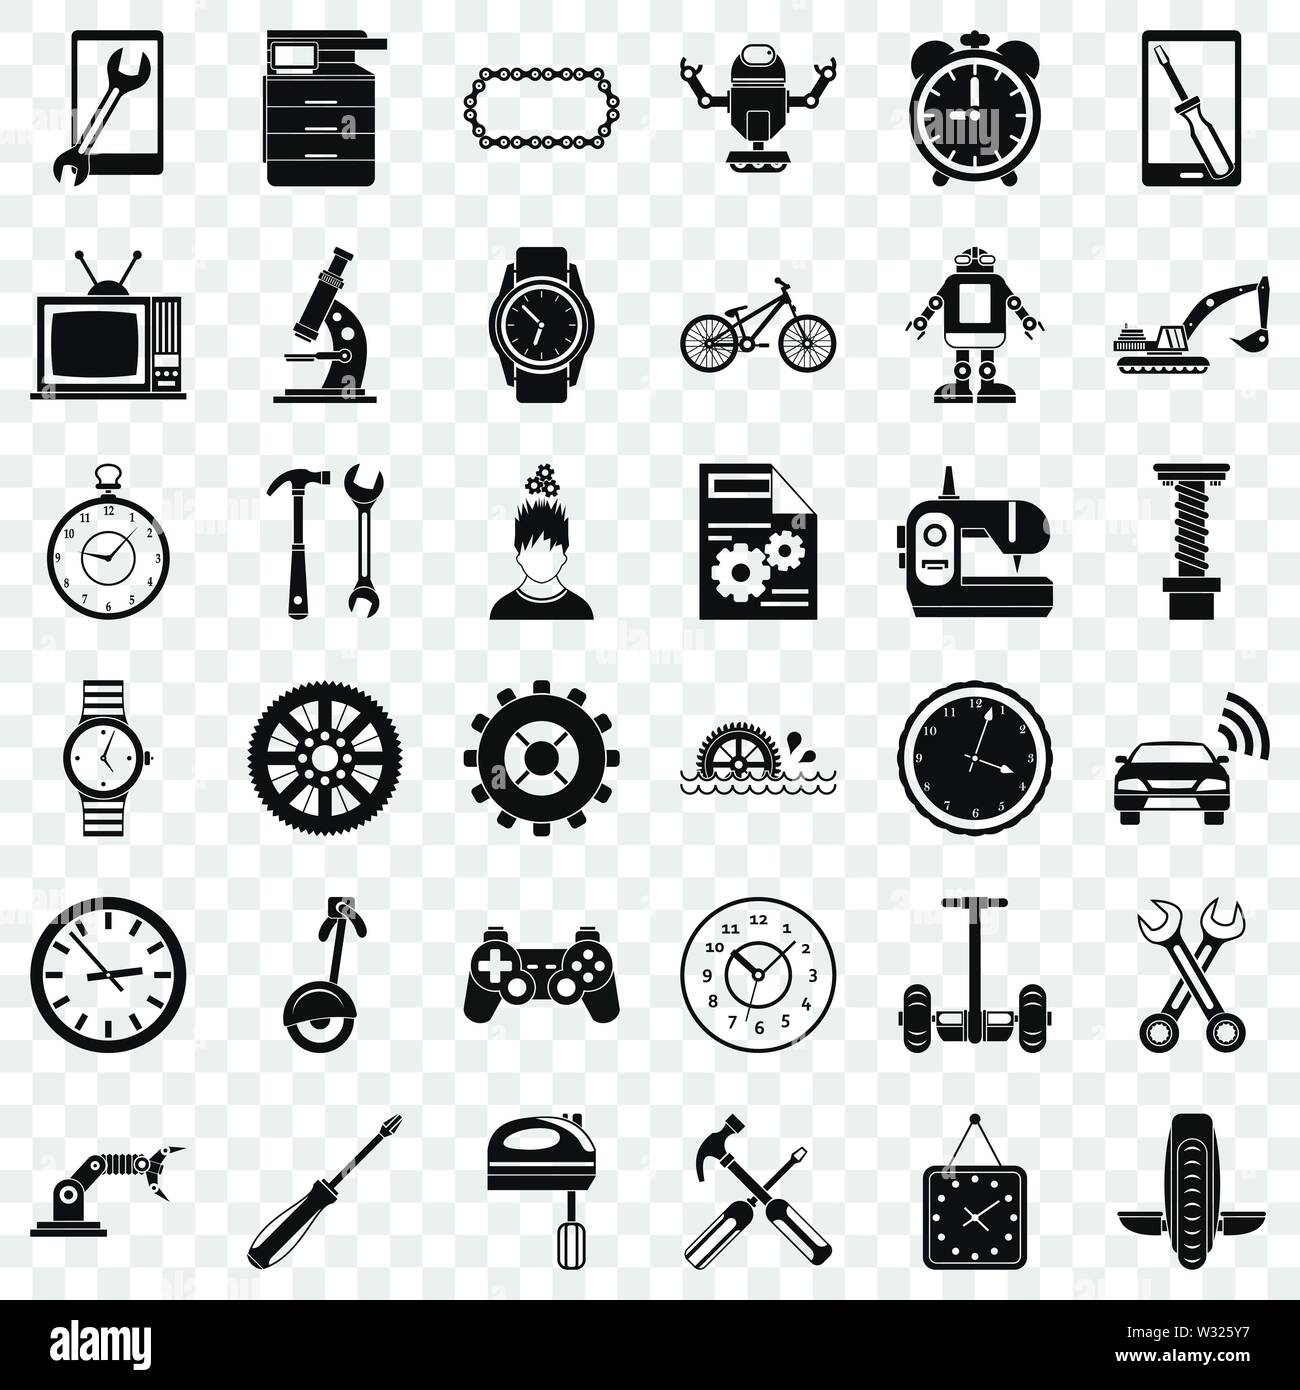 Screwdriver icons set, simple style Stock Vector